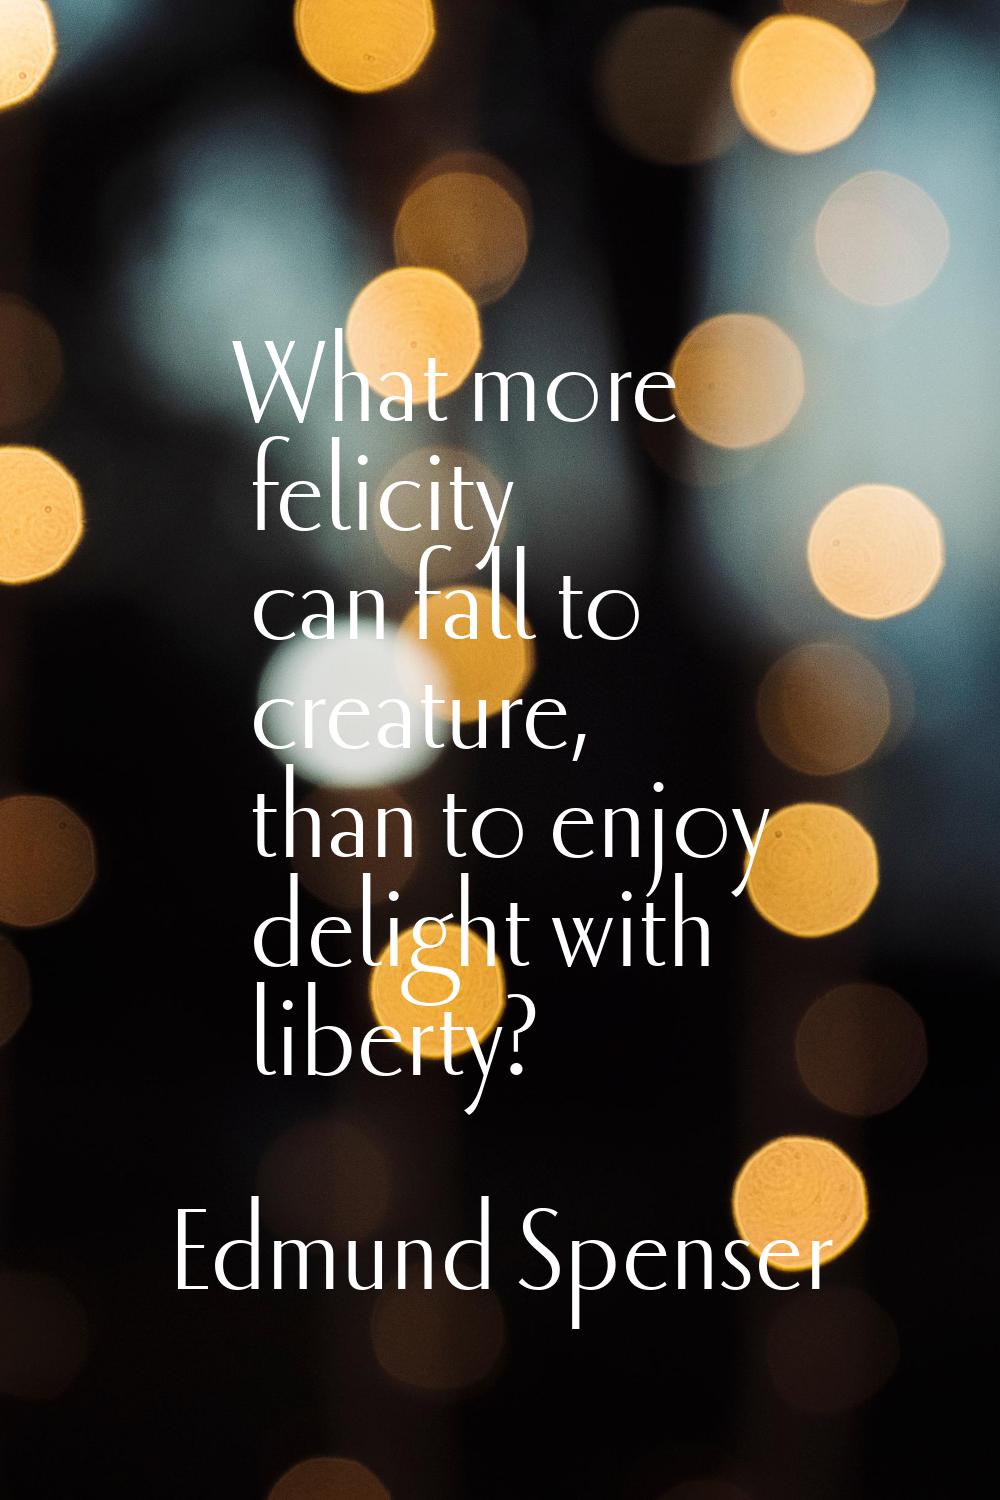 What more felicity can fall to creature, than to enjoy delight with liberty?